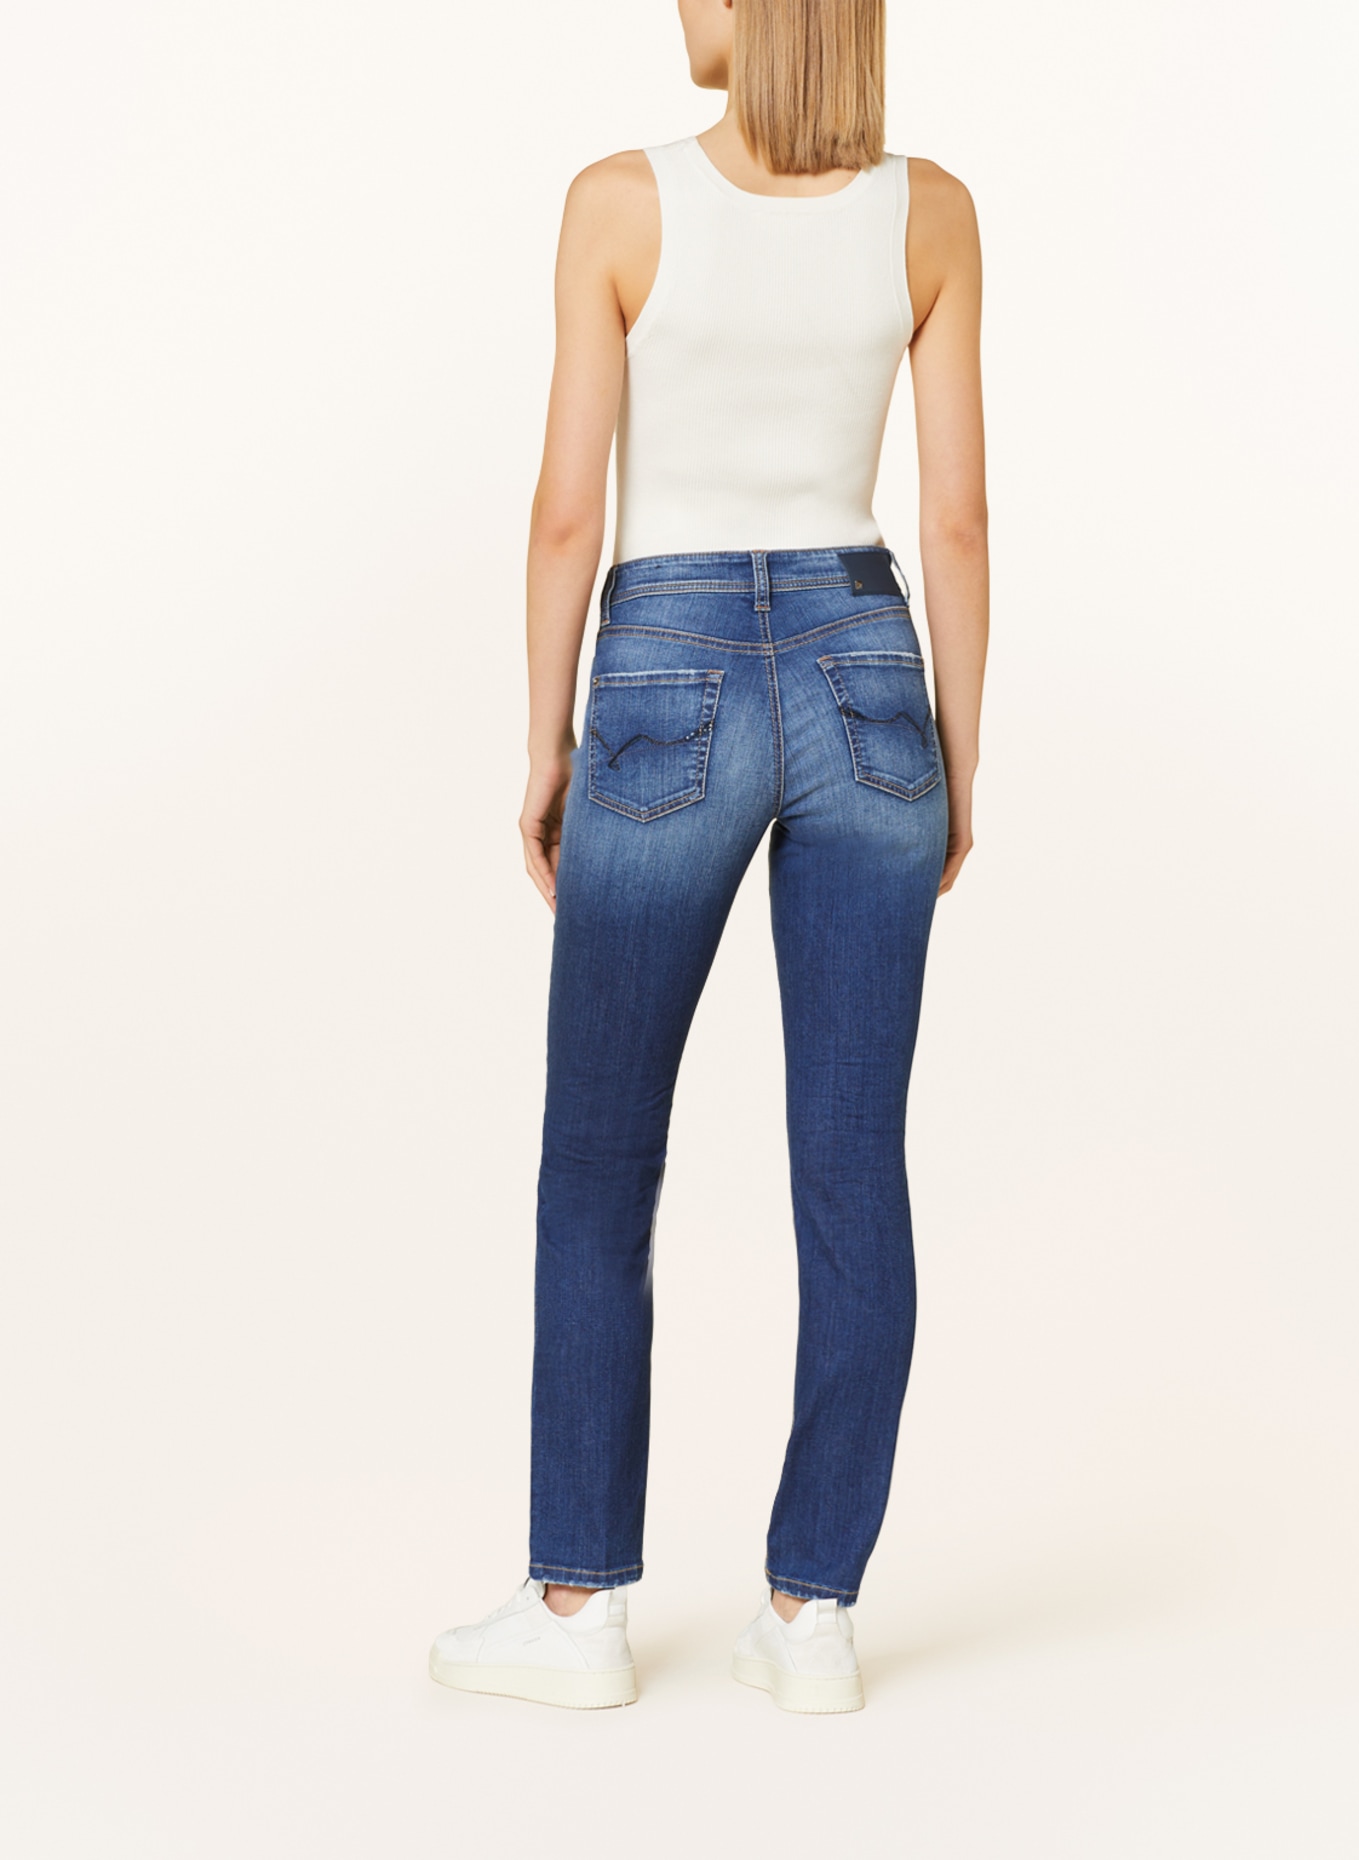 CAMBIO Skinny jeans PARLA with sequins, Color: 5061 medium contrast splinted (Image 3)